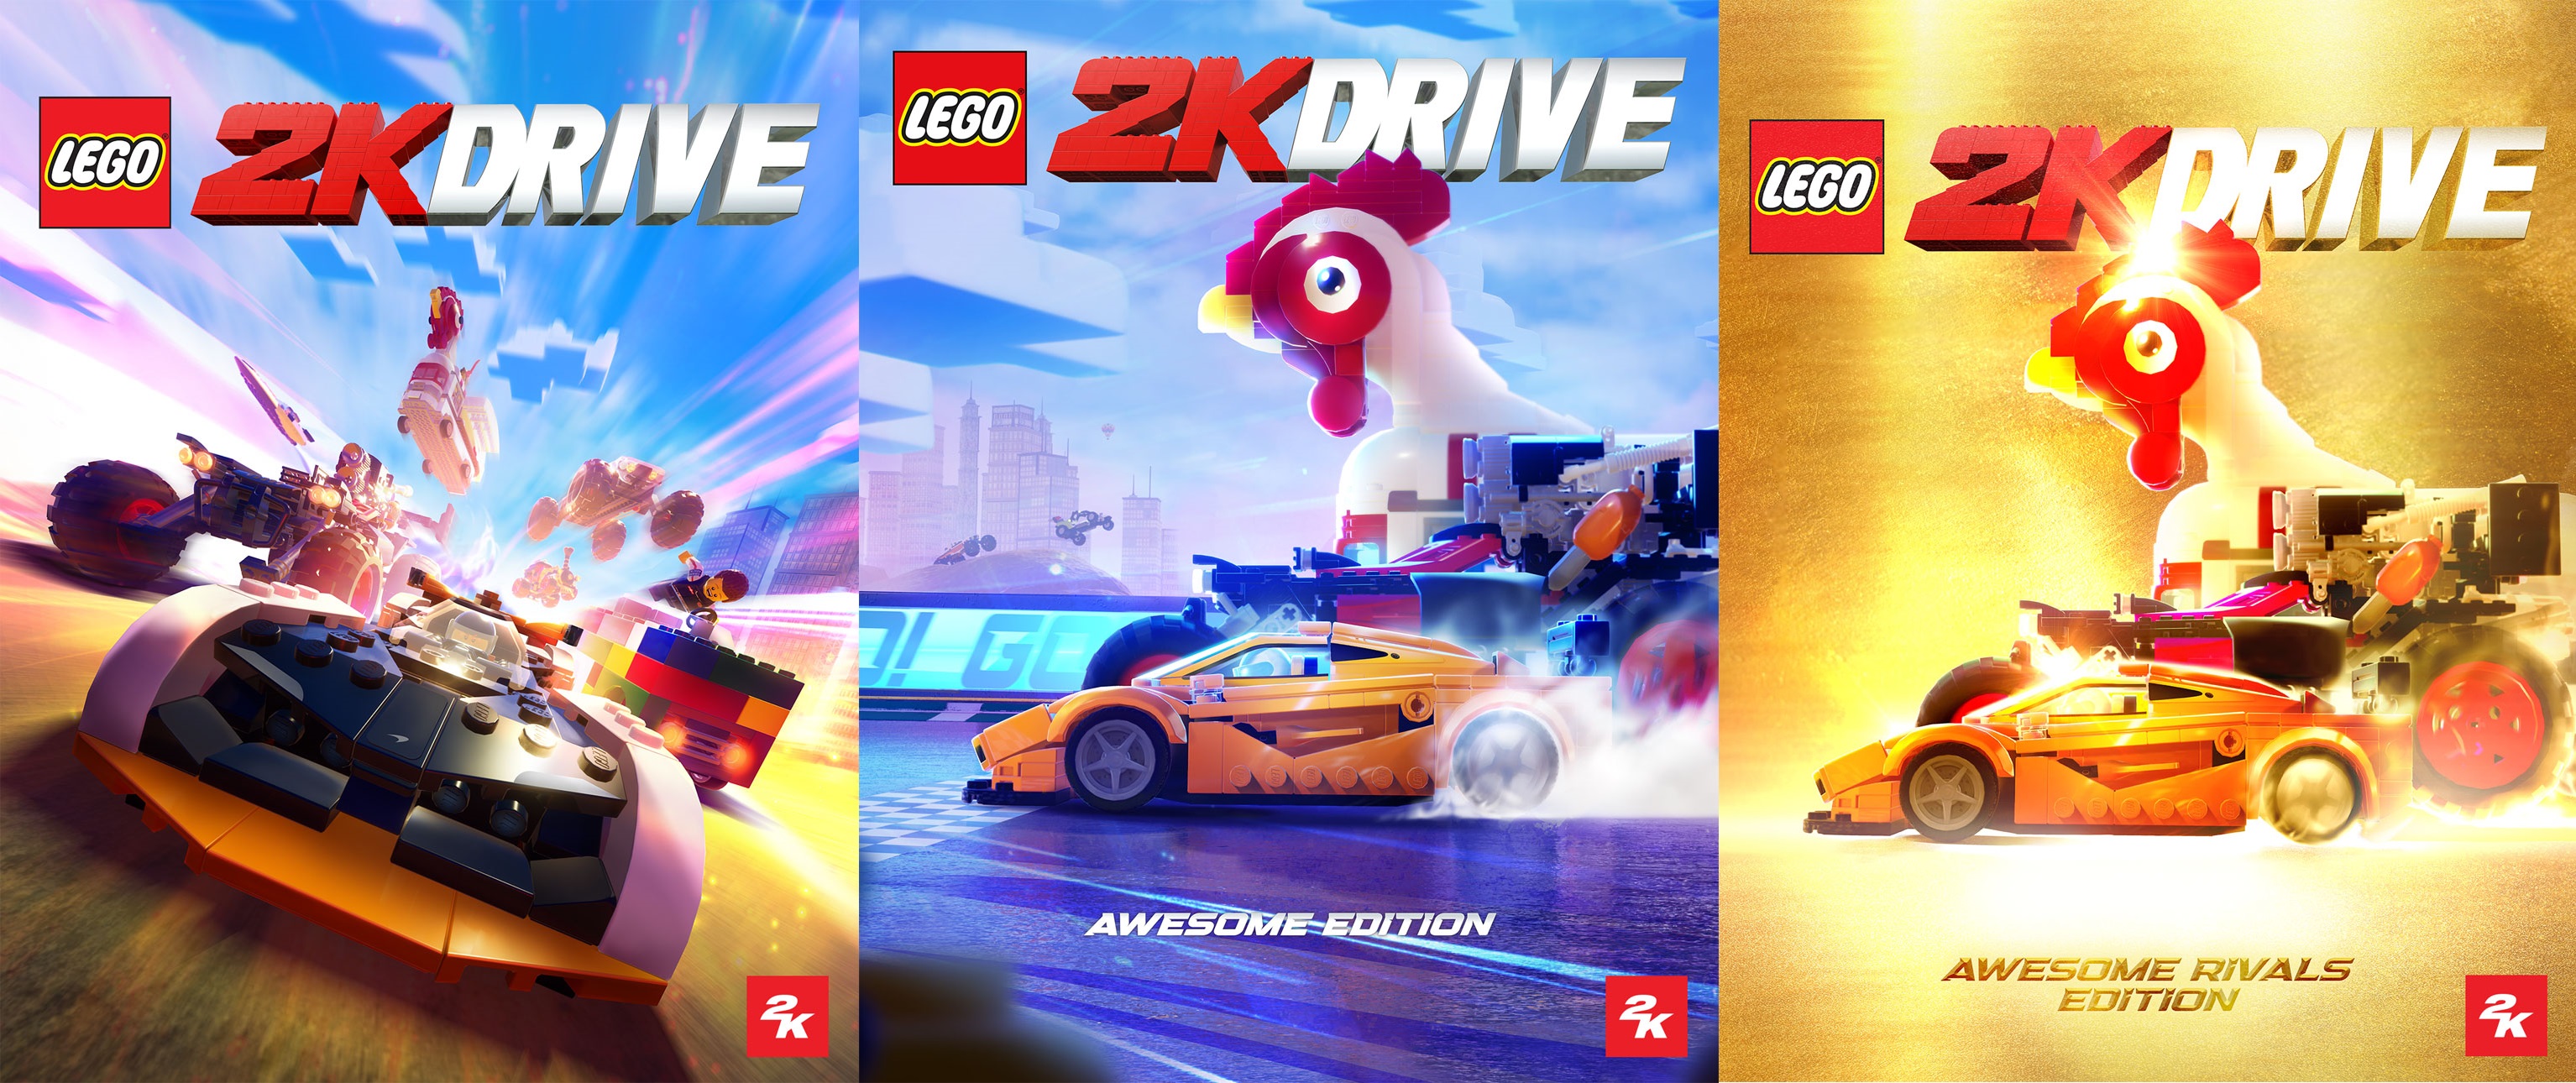 LEGO 2K Drive Officially Brick - The Announced Fan